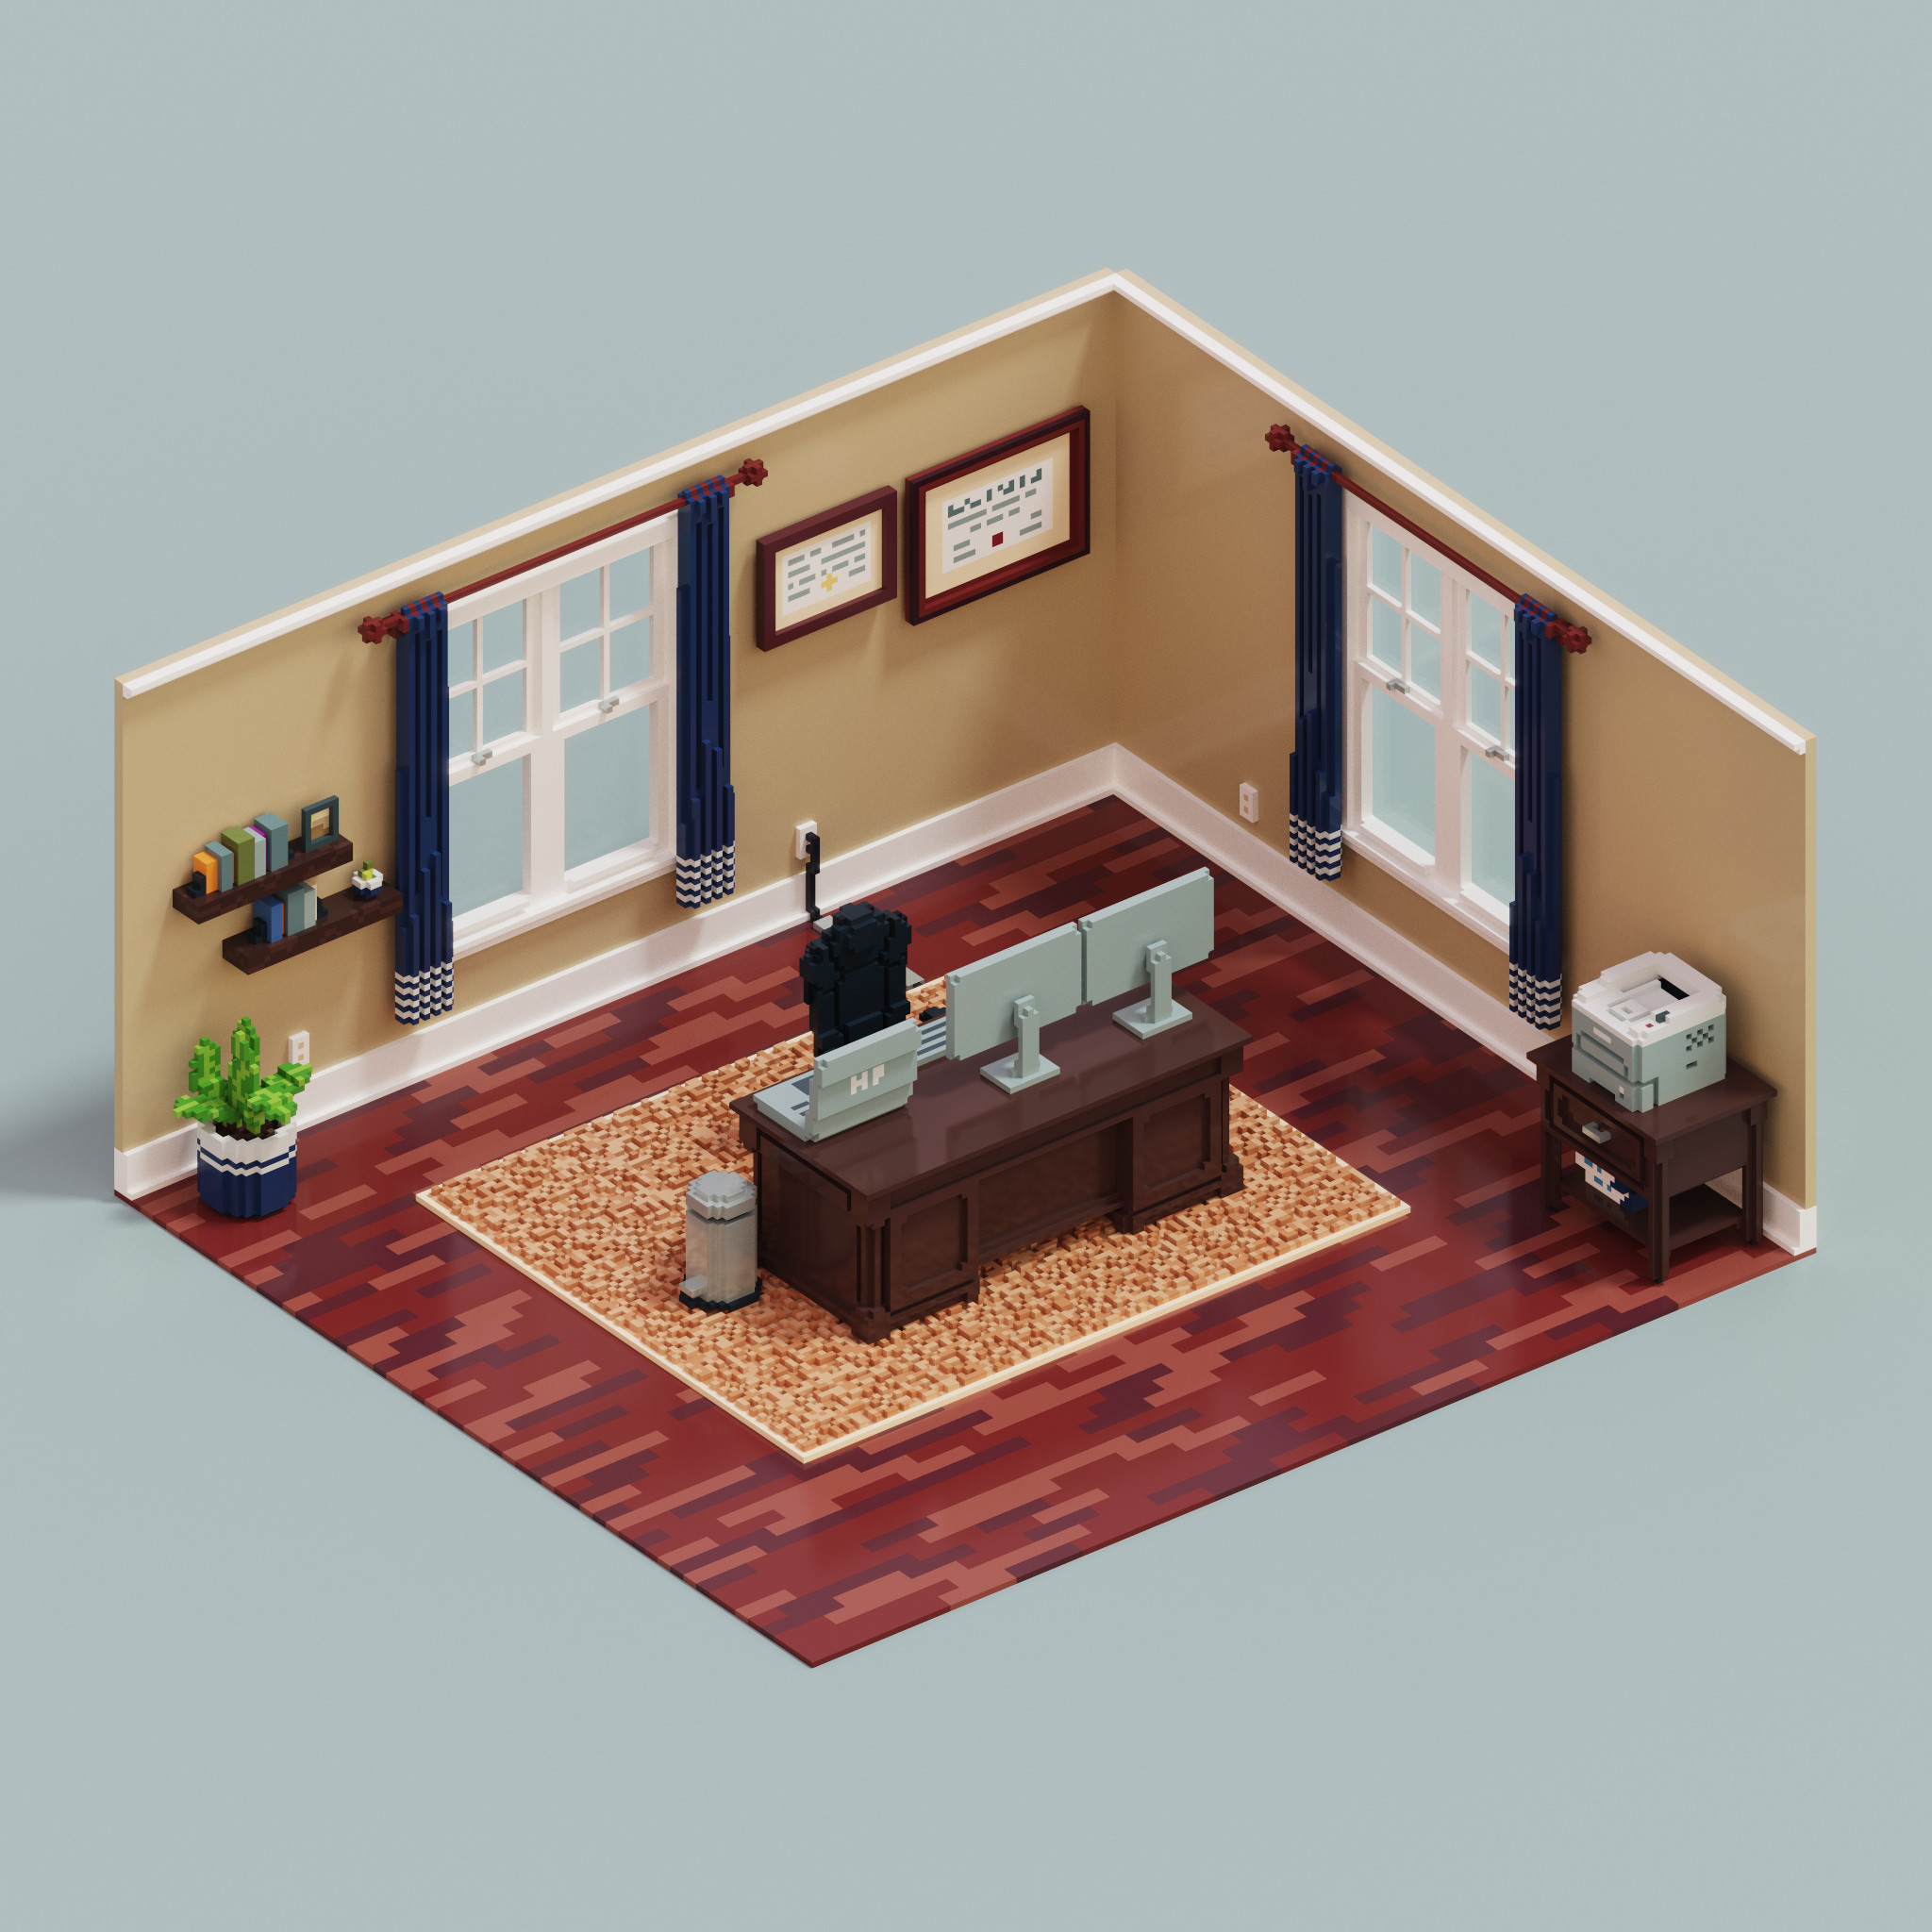 Voxel home office created using Magicavoxel software.